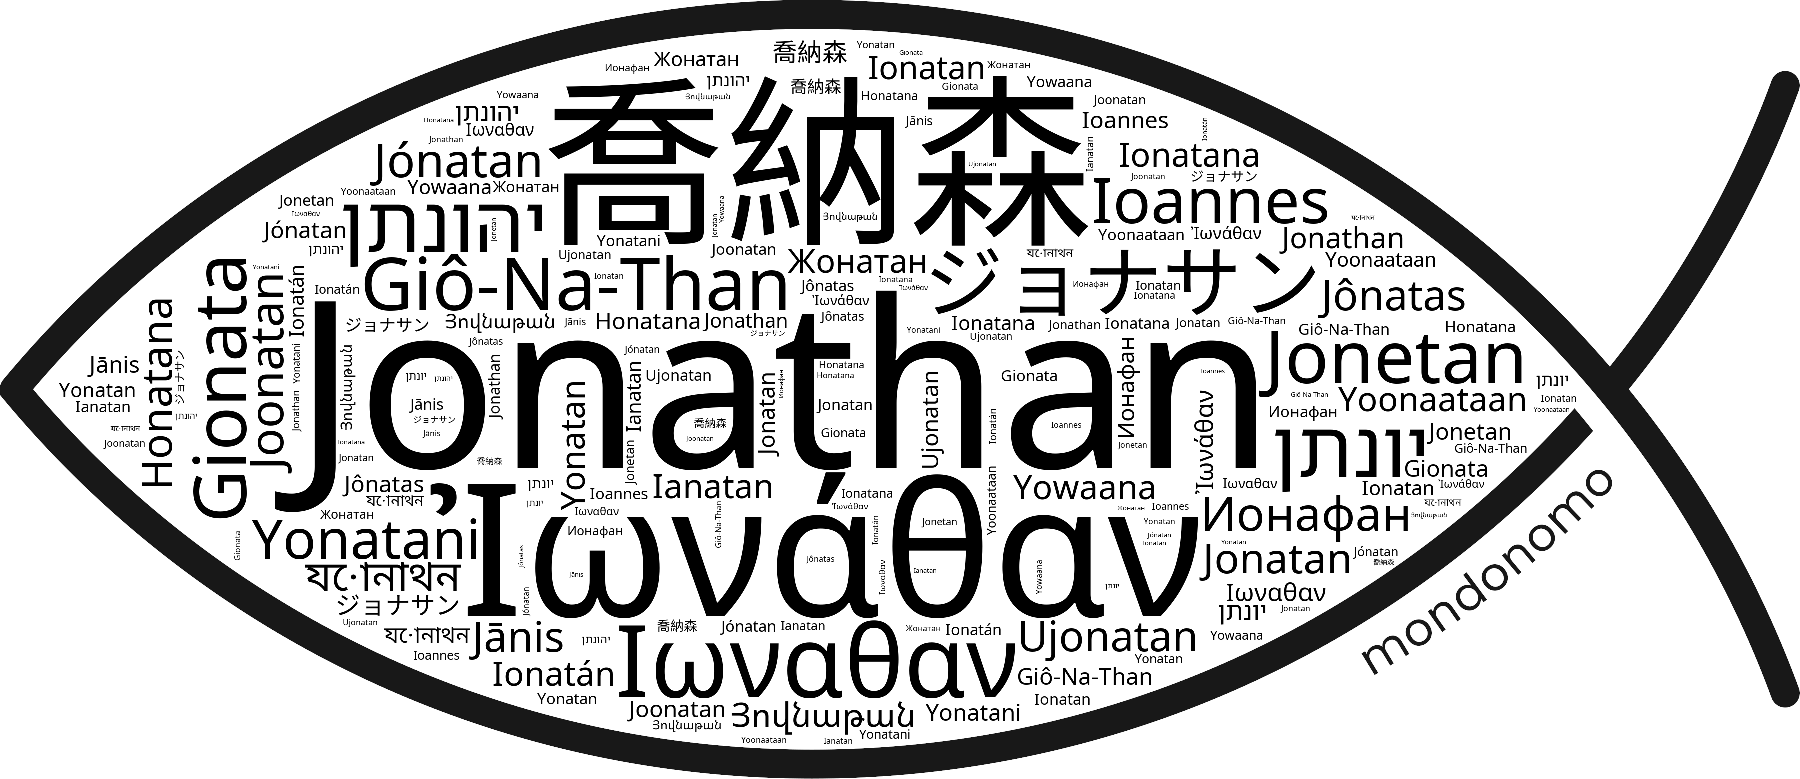 Name Jonathan in the world's Bibles